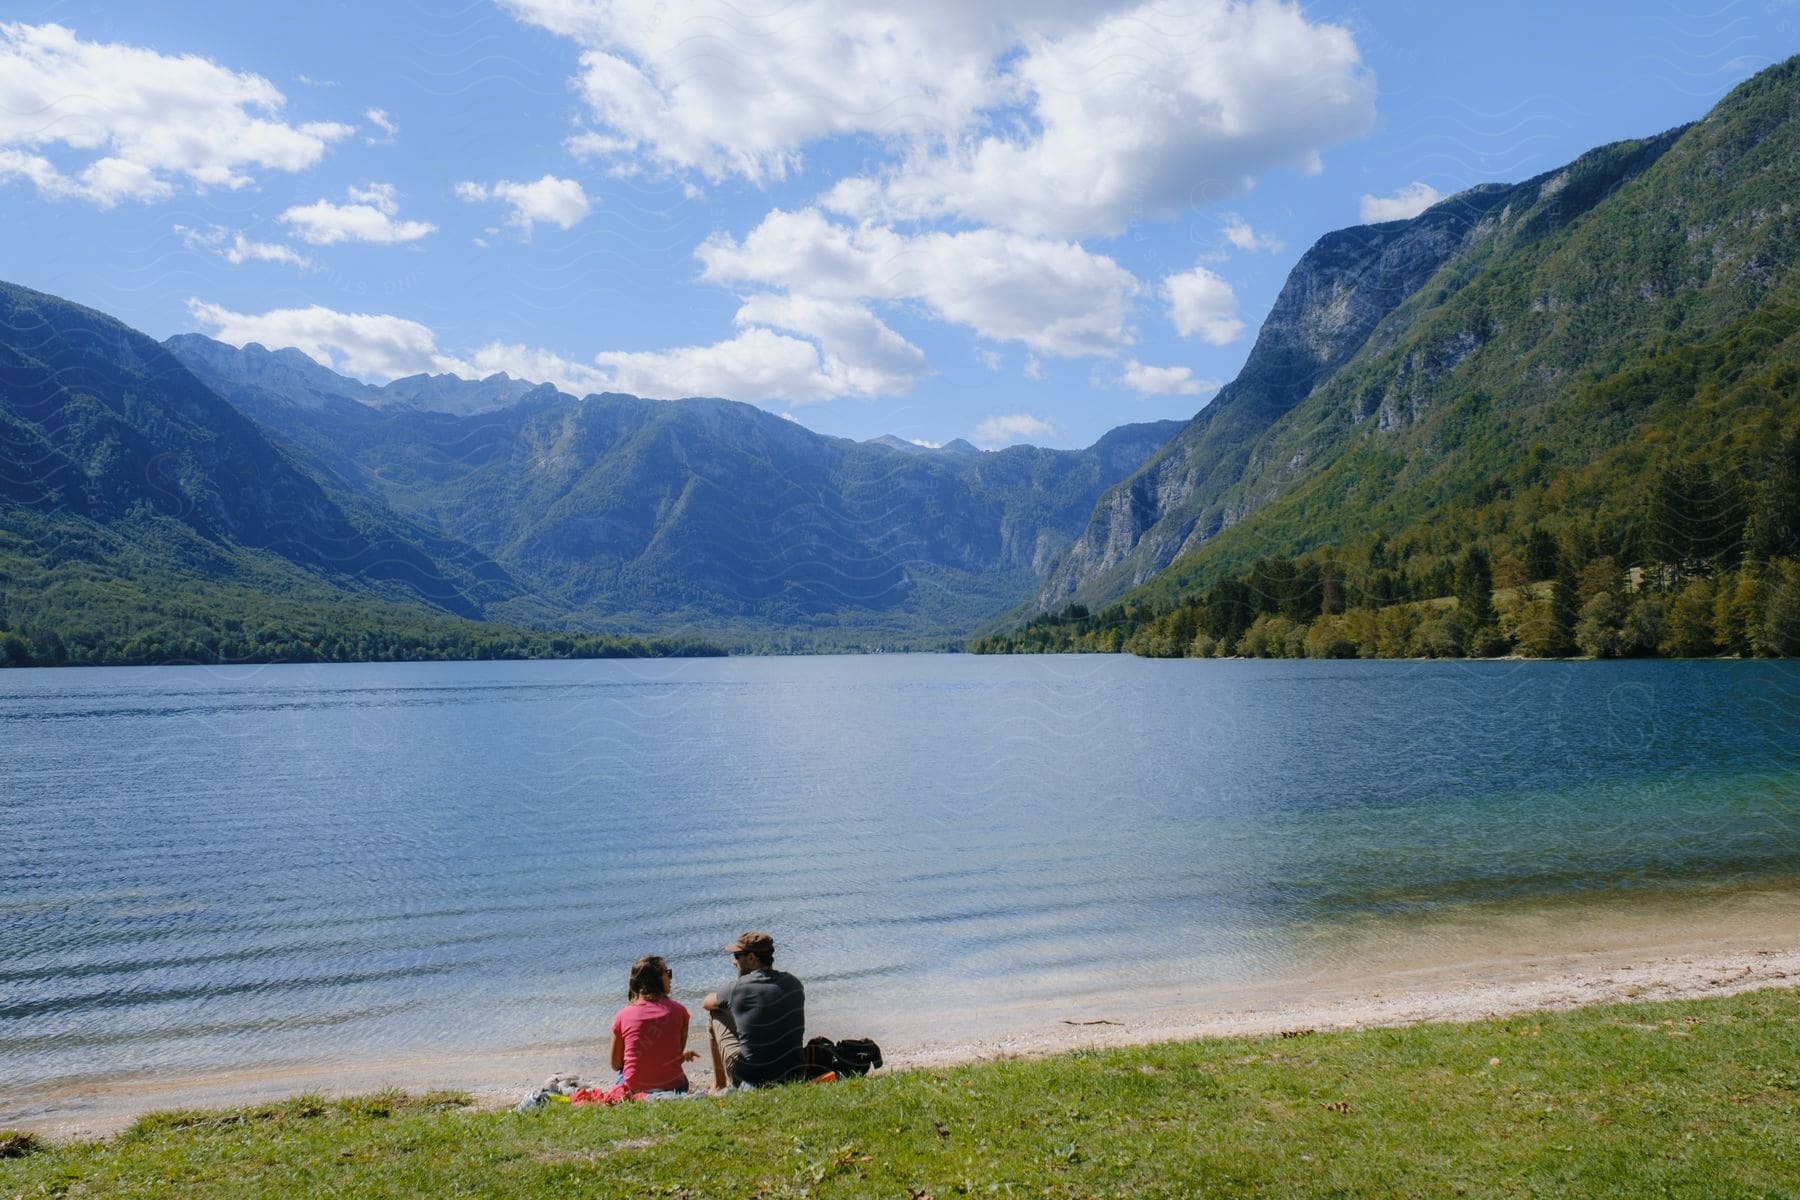 A couple looking at each other on the shore of a lake and in the background several mountains full of trees and vegetation.